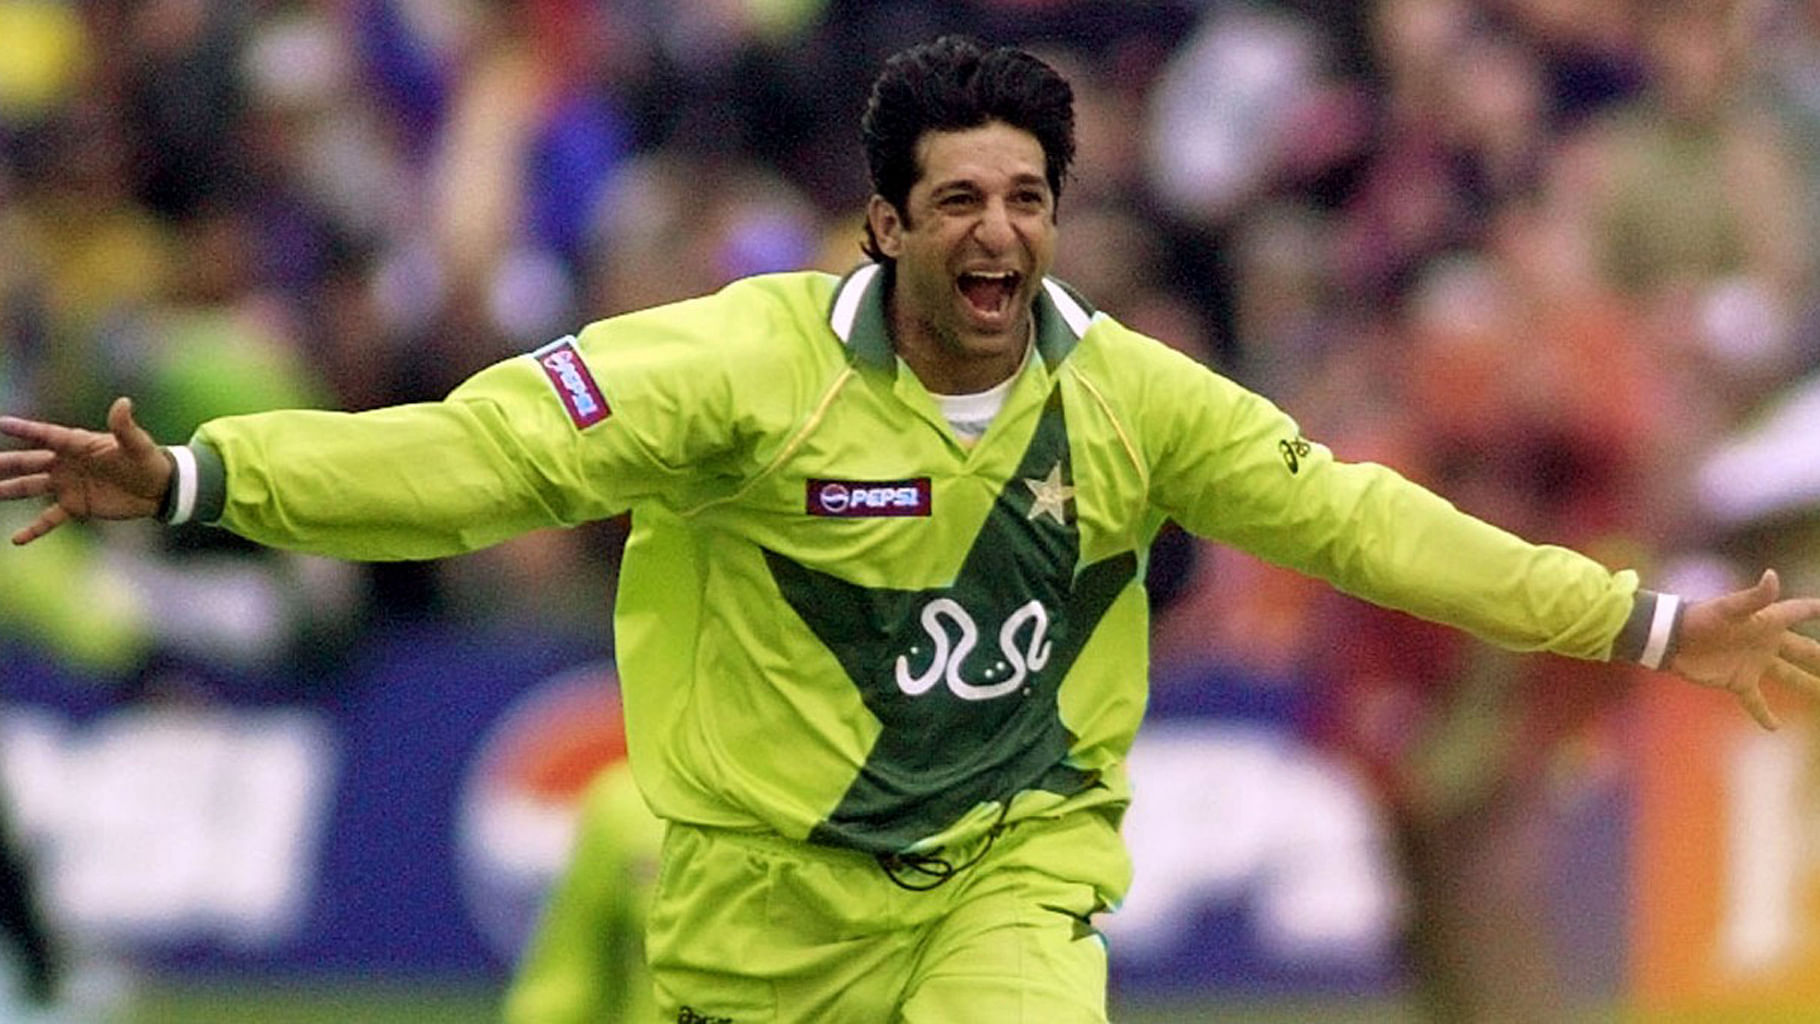 Former Pakistan pacer Shoaib Akhtar on Friday shared a ‘leaked video’ of Wasim Akram where the former captain is heard supposedly criticising the current state of affairs of cricket in the country.